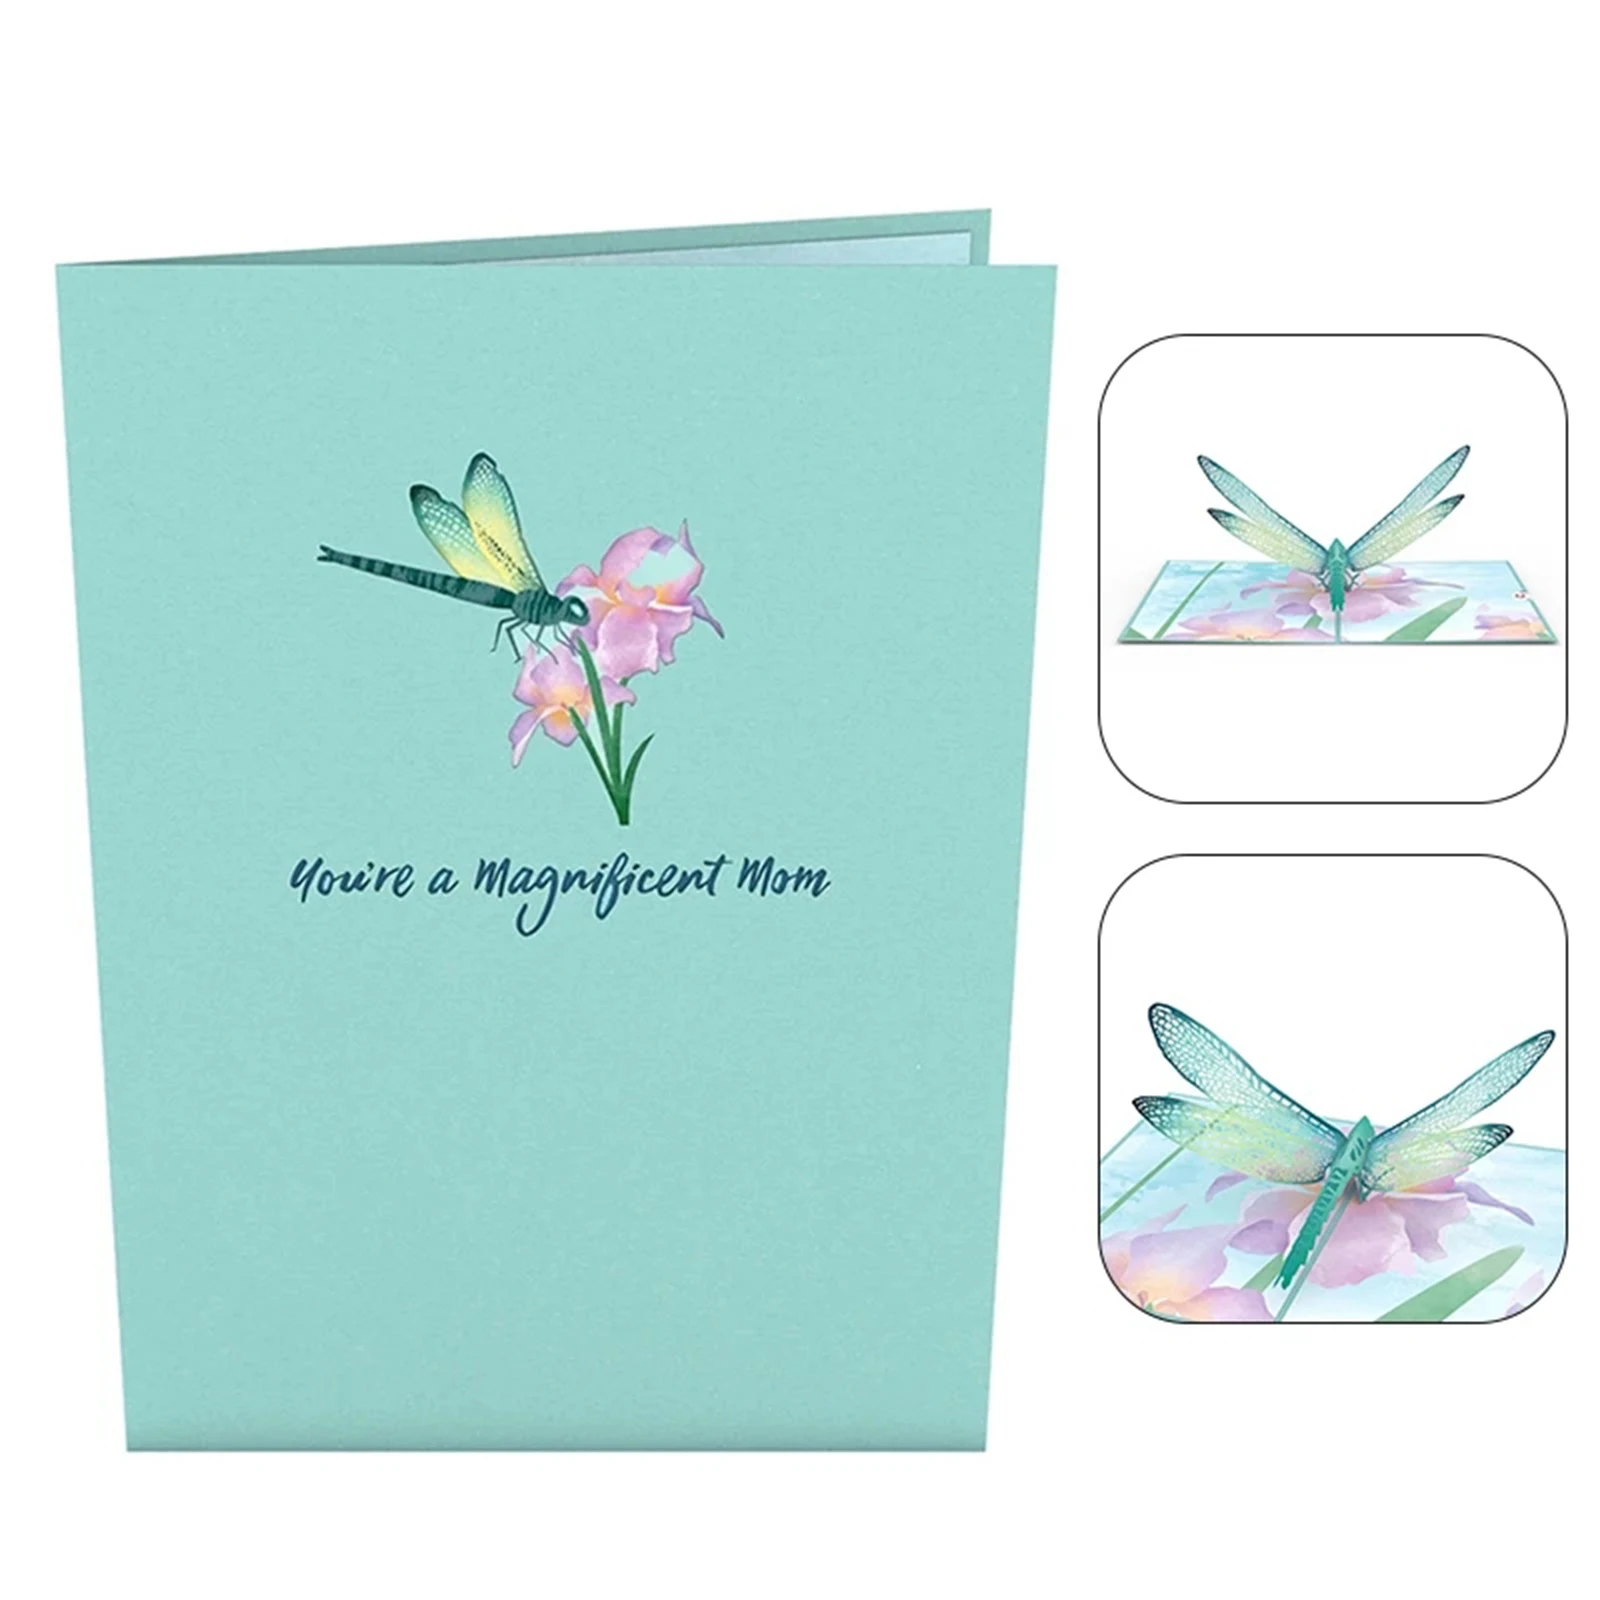 3D Pop Up Cards Greeting Card Fashion Dragonfly with Envelope Gift Anniversary 